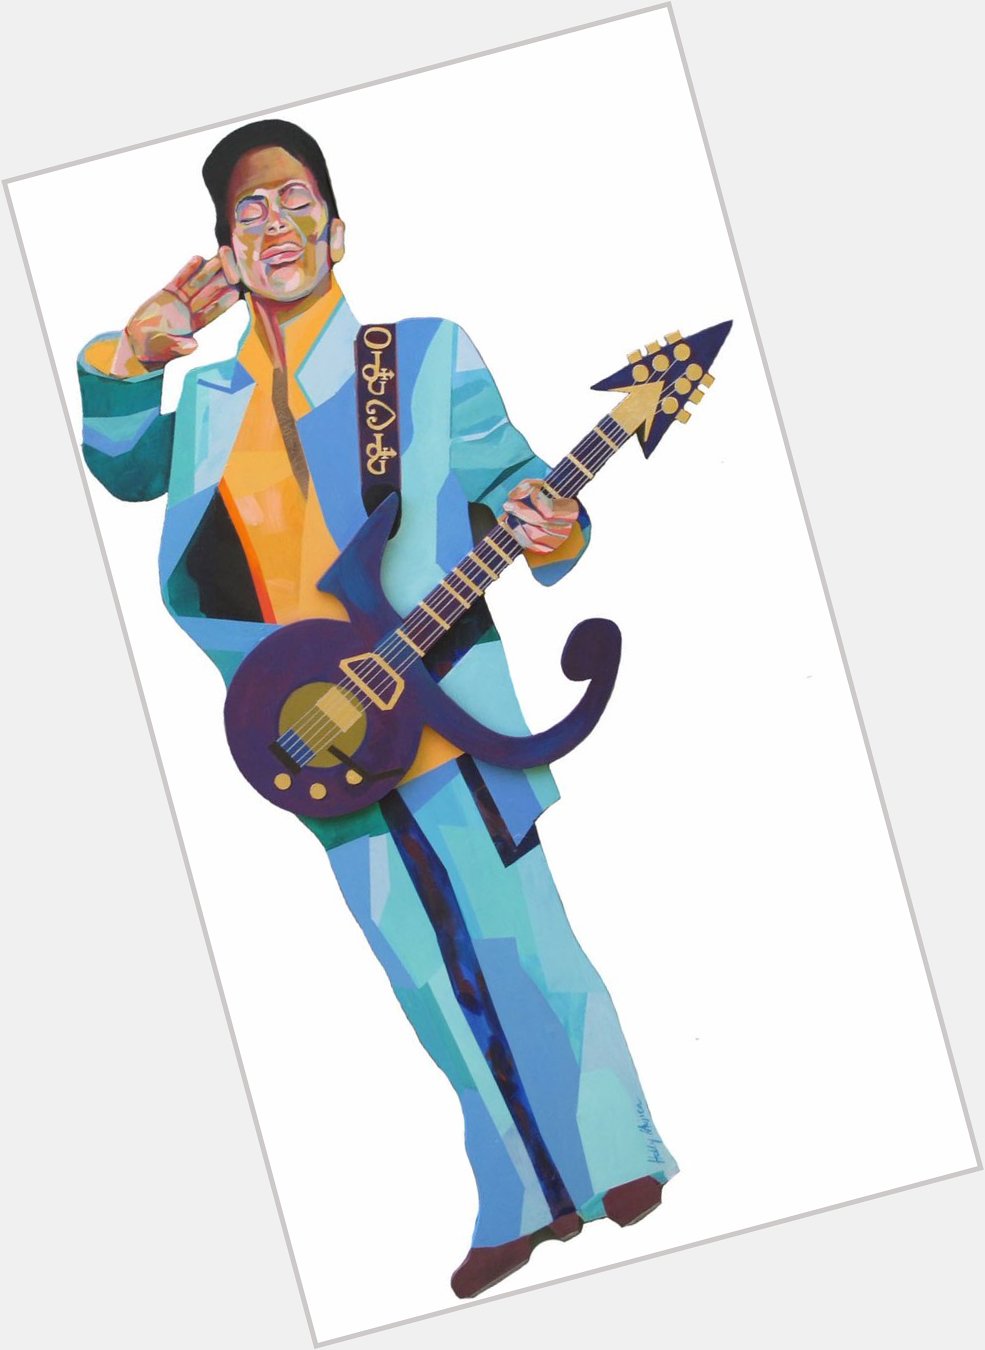 Happy Birthday, Prince! Here s a cutout I made of him a while back.      